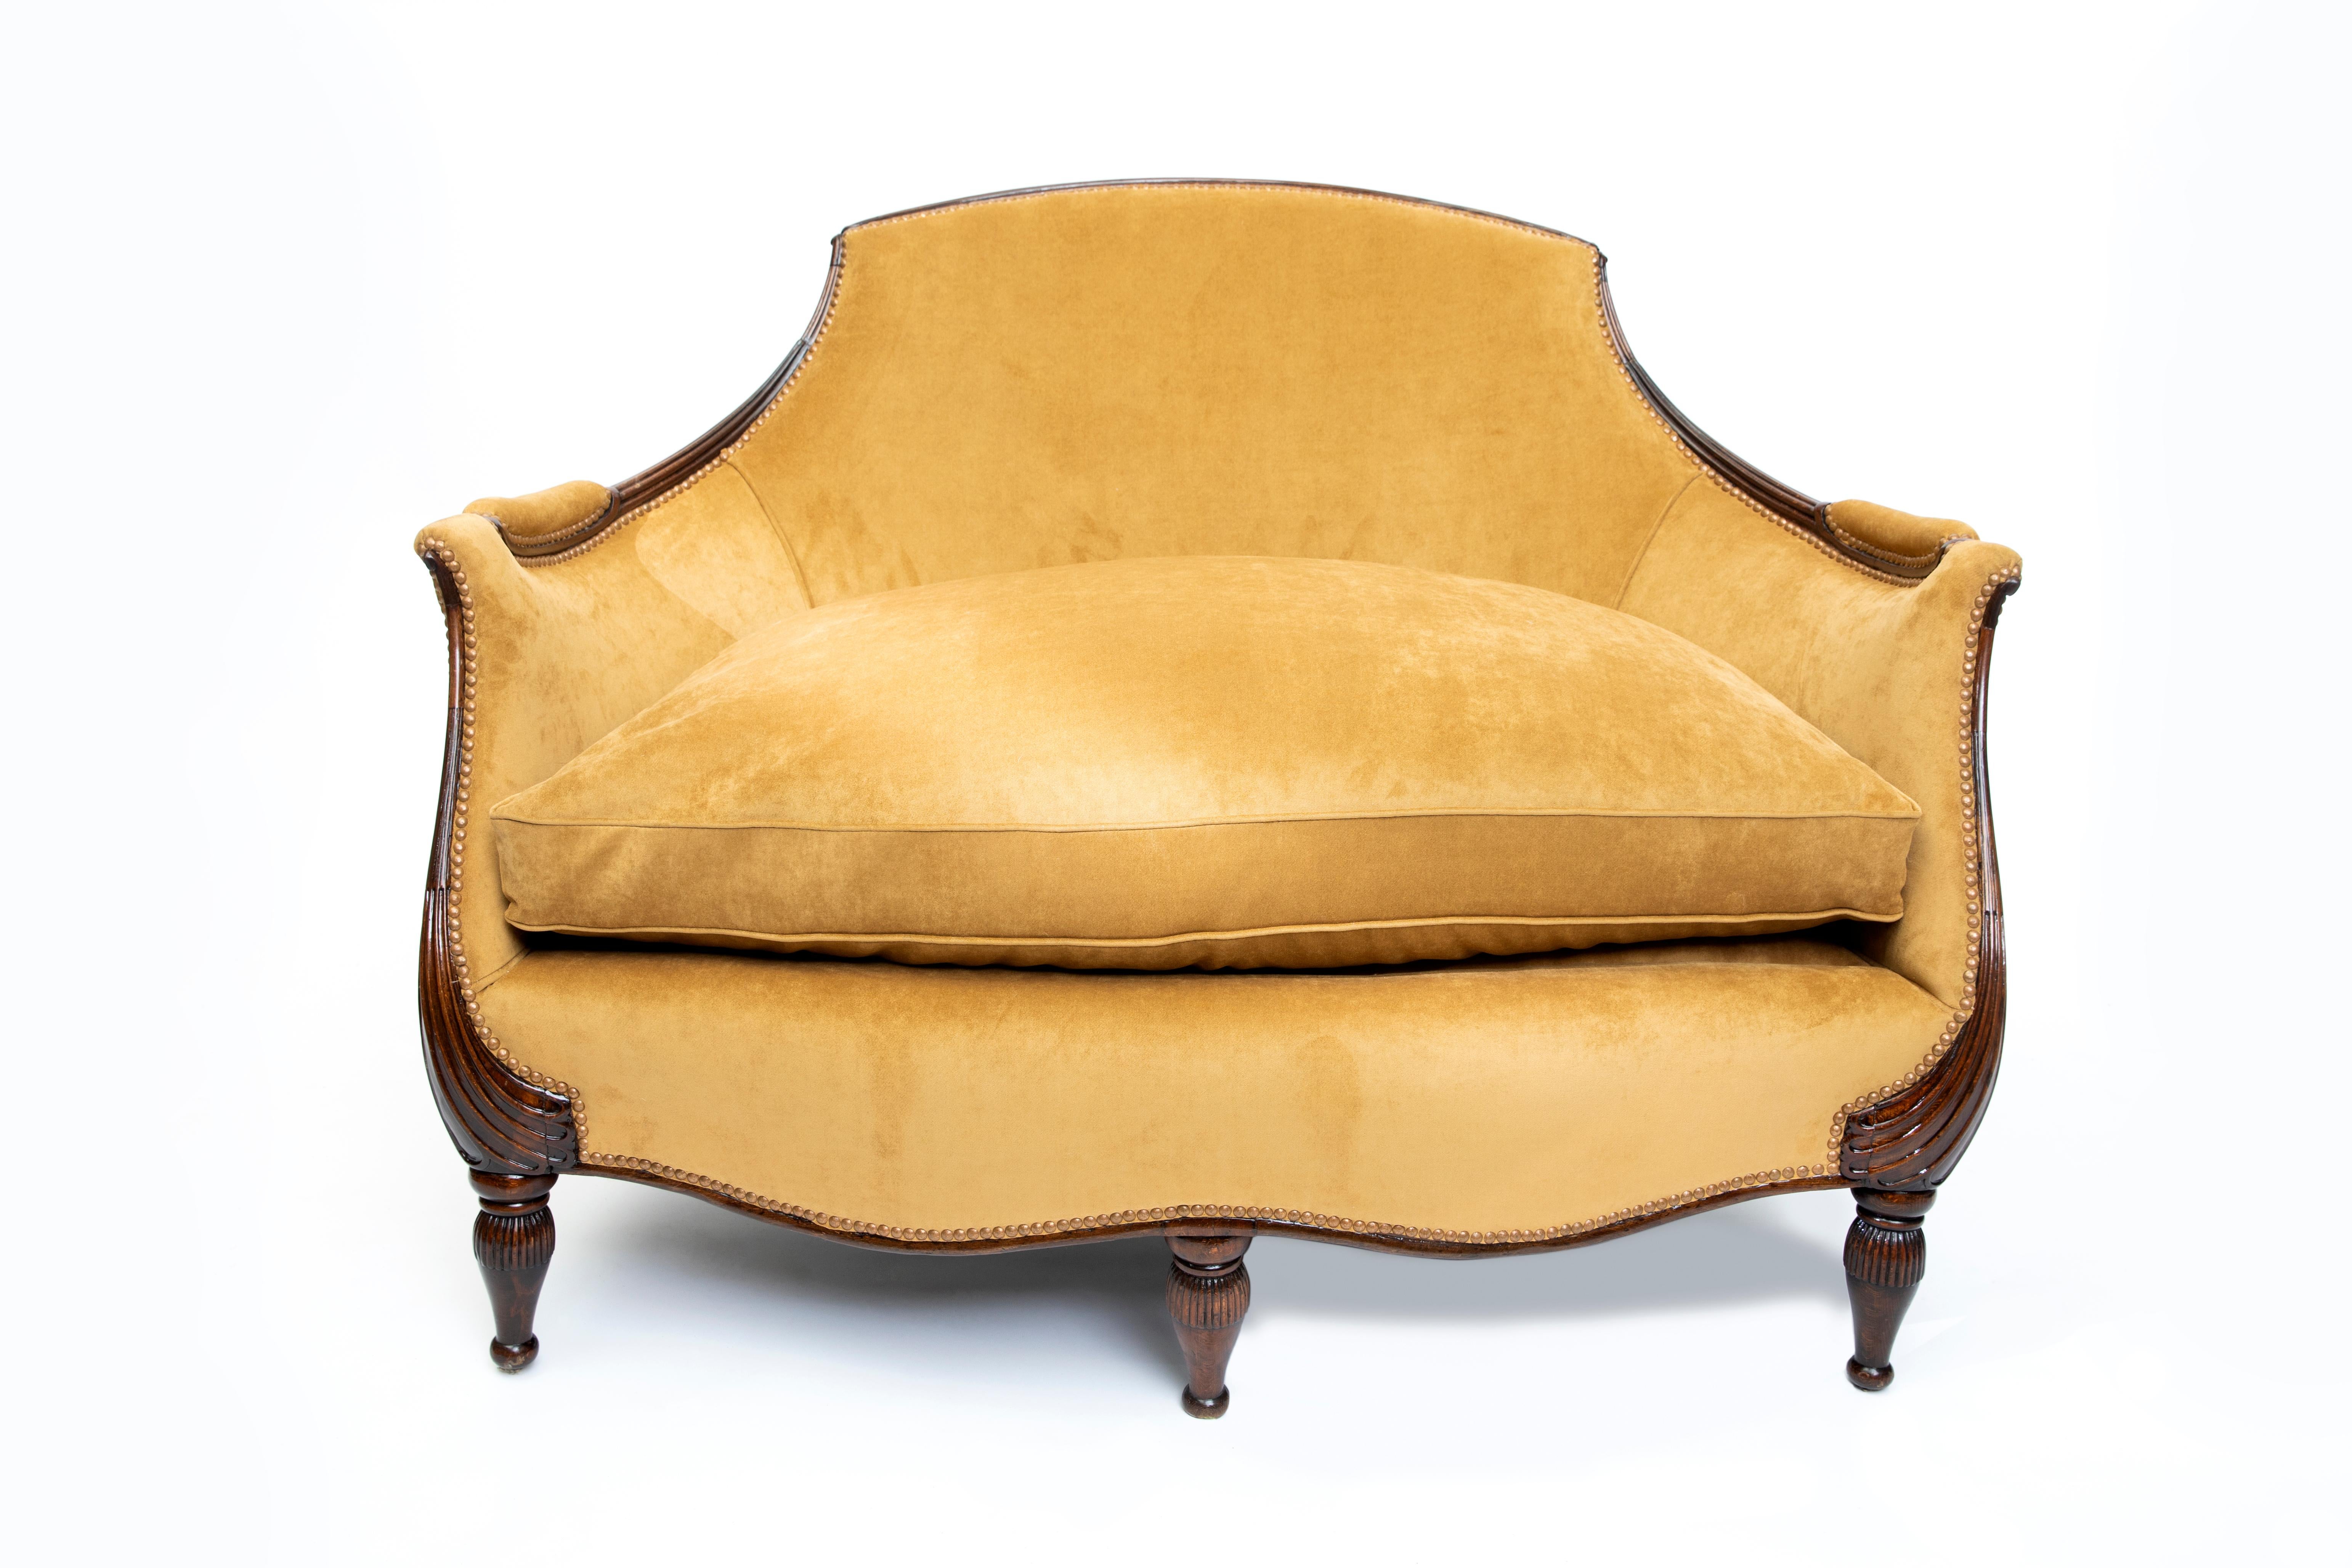 Fabric and wood Art Deco three piece suite, Francia, circa 1925.
Attributed to Louis Sue. 
One large sofa and two armchairs.

Large sofa dimensions: 90 cm height, 130 cm width, 90 cm depth, seat height 55 cm.
Pair of armchairs dimensions: 90 cm